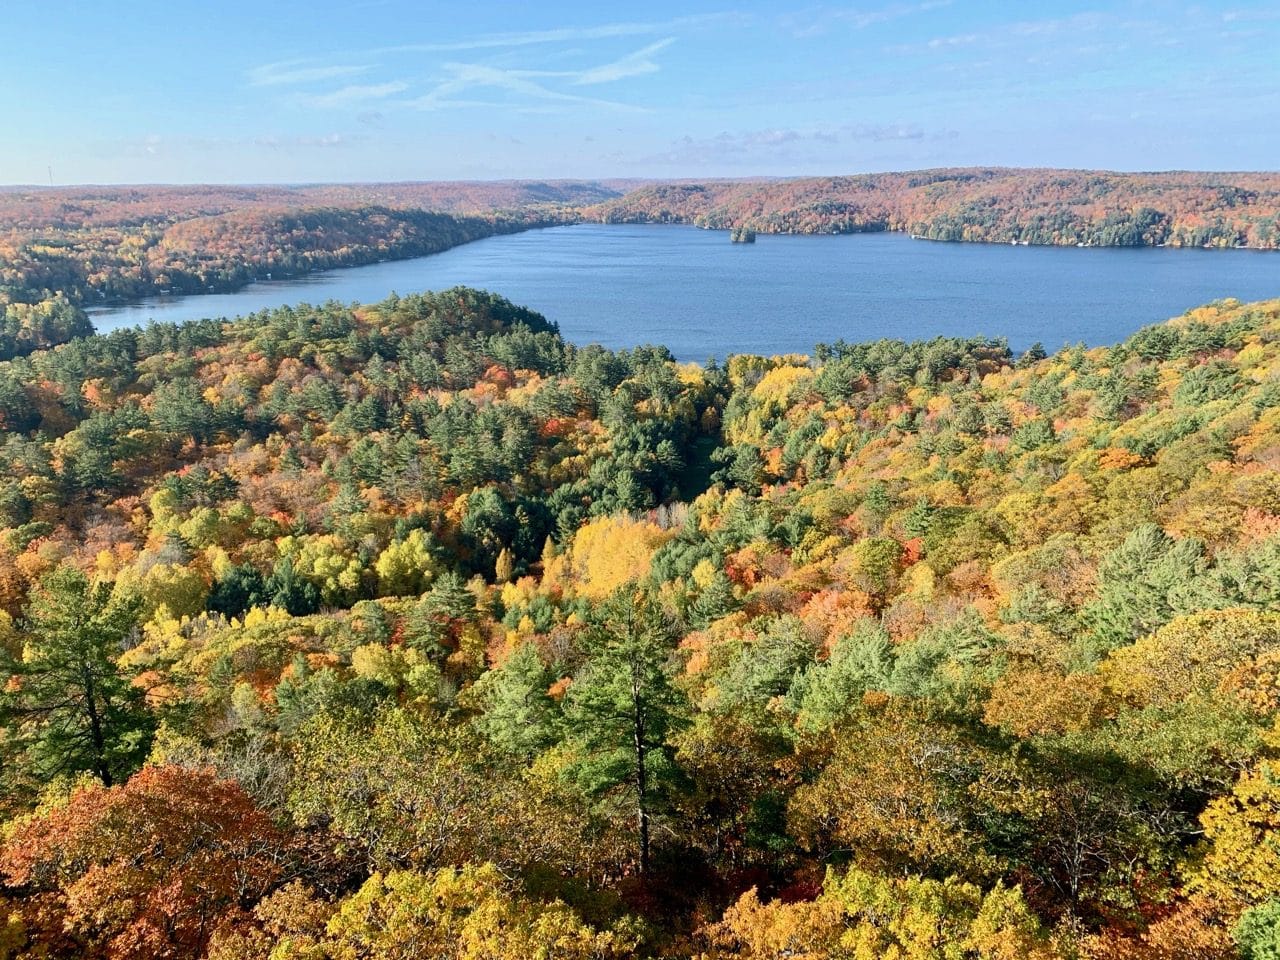 Colourful Autumn views in Muskoka from the Dorset Lookout Towers's Observation Deck.